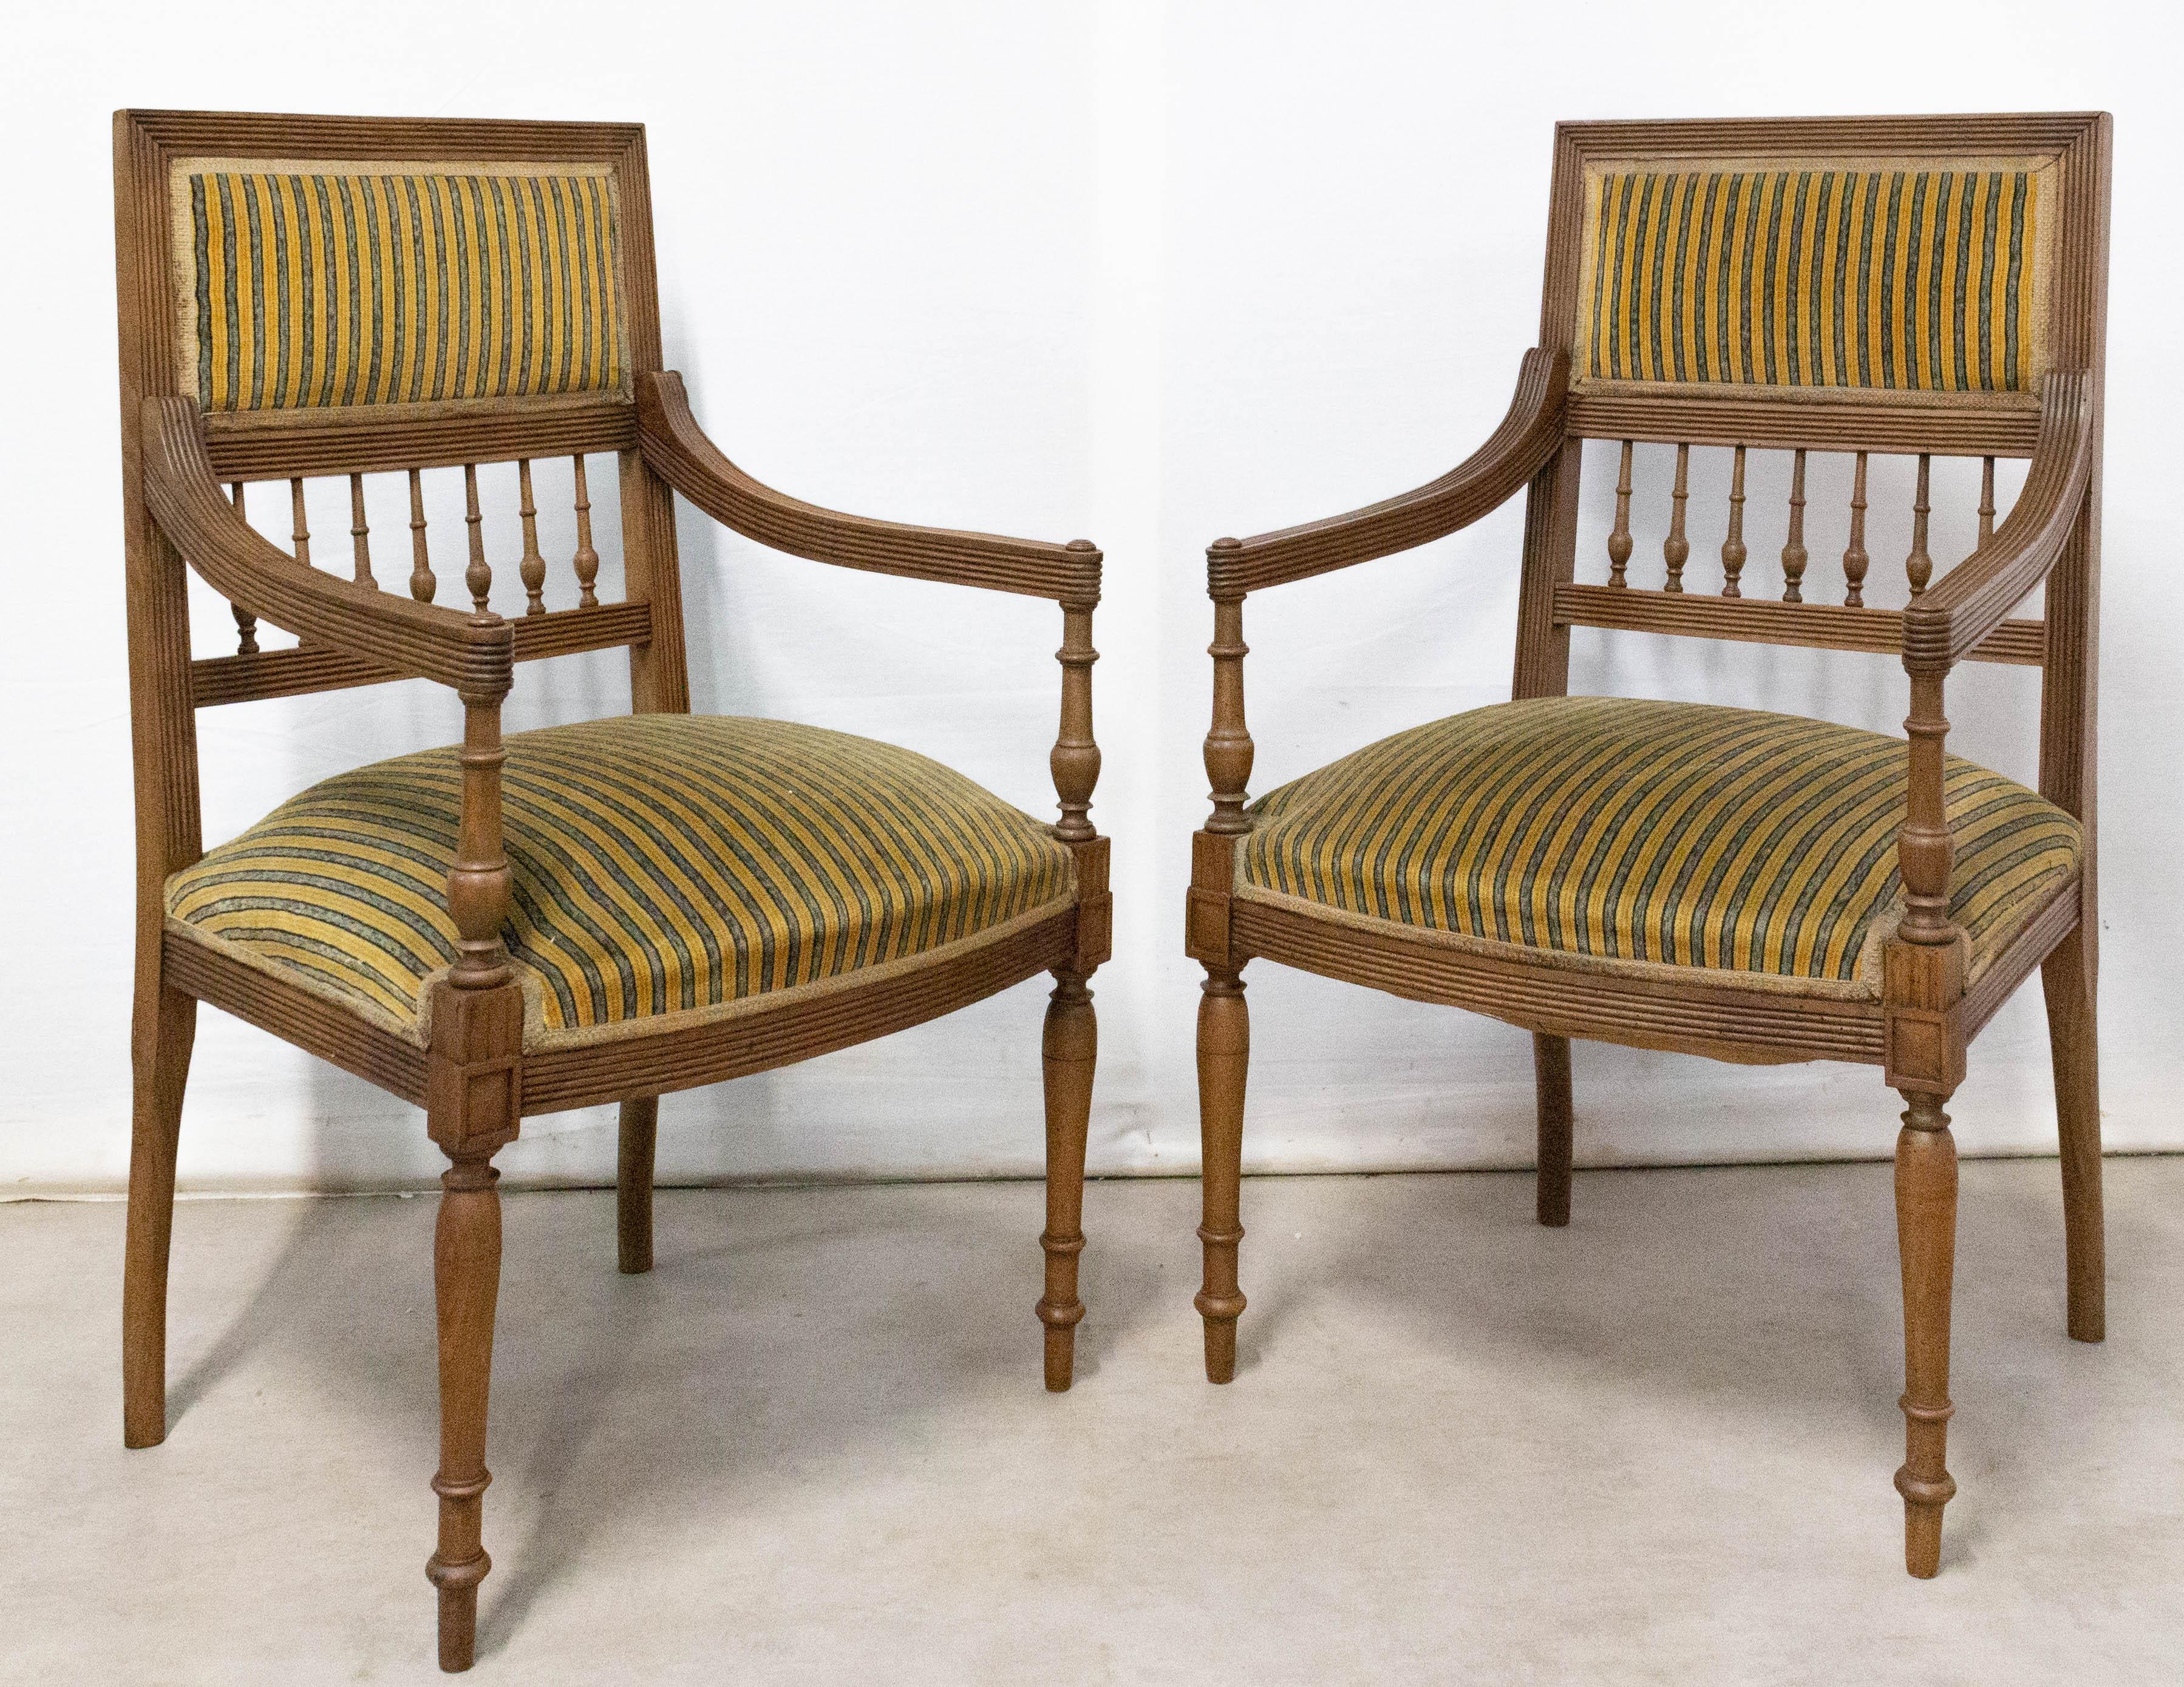 Pair of French open armchairs side or desk chairs Louis XVI revival,
circa 1900
The fabric can easily be changed to wear with your interior, 
The upholstery is the original: suitable but a bit old.
Good condition
Frames sound and solid.

For